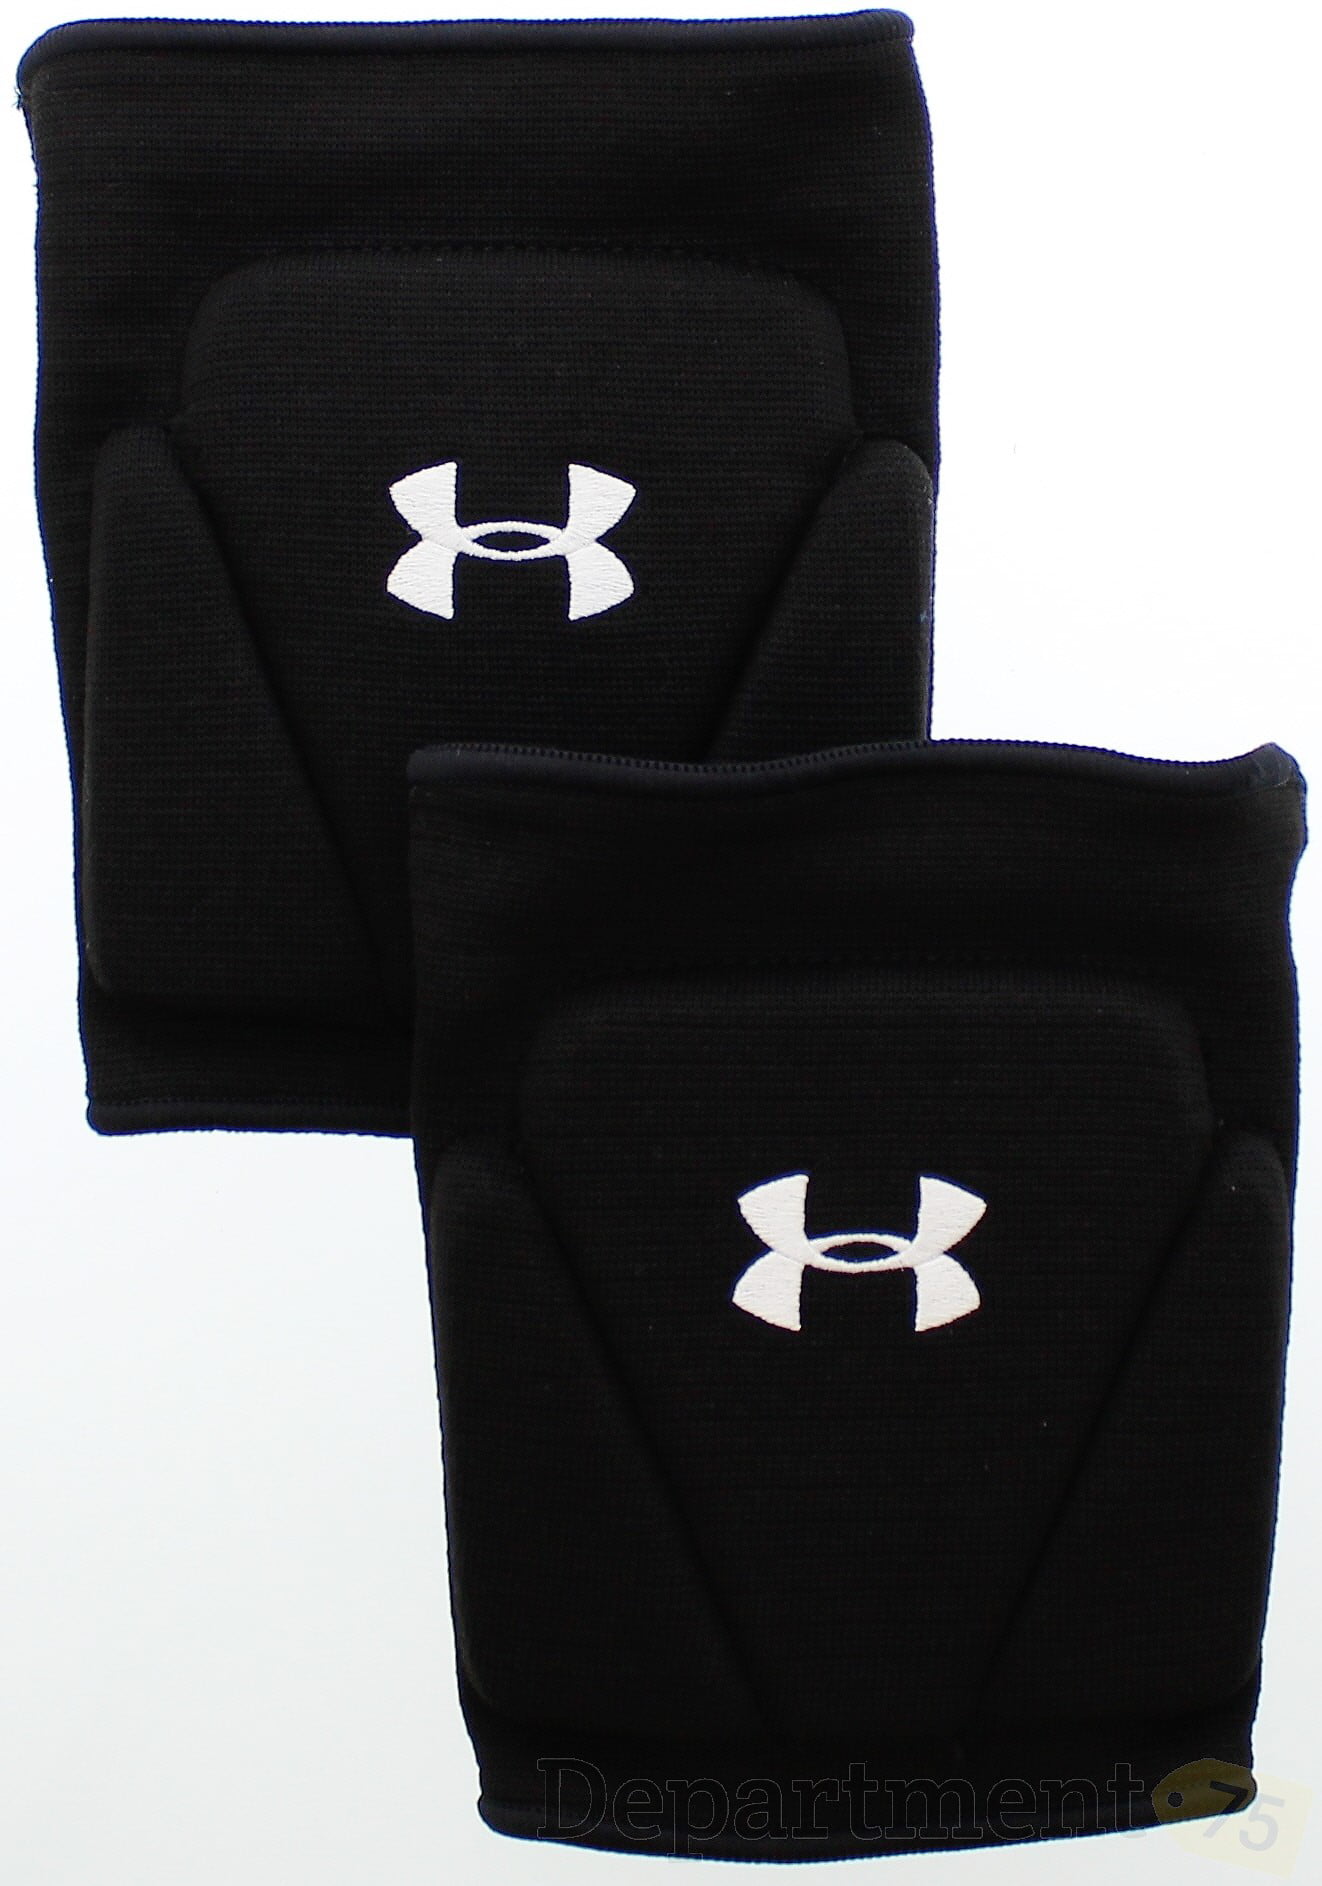 Under Armour Adult Strive 2.0 Volleyball Knee Pad 